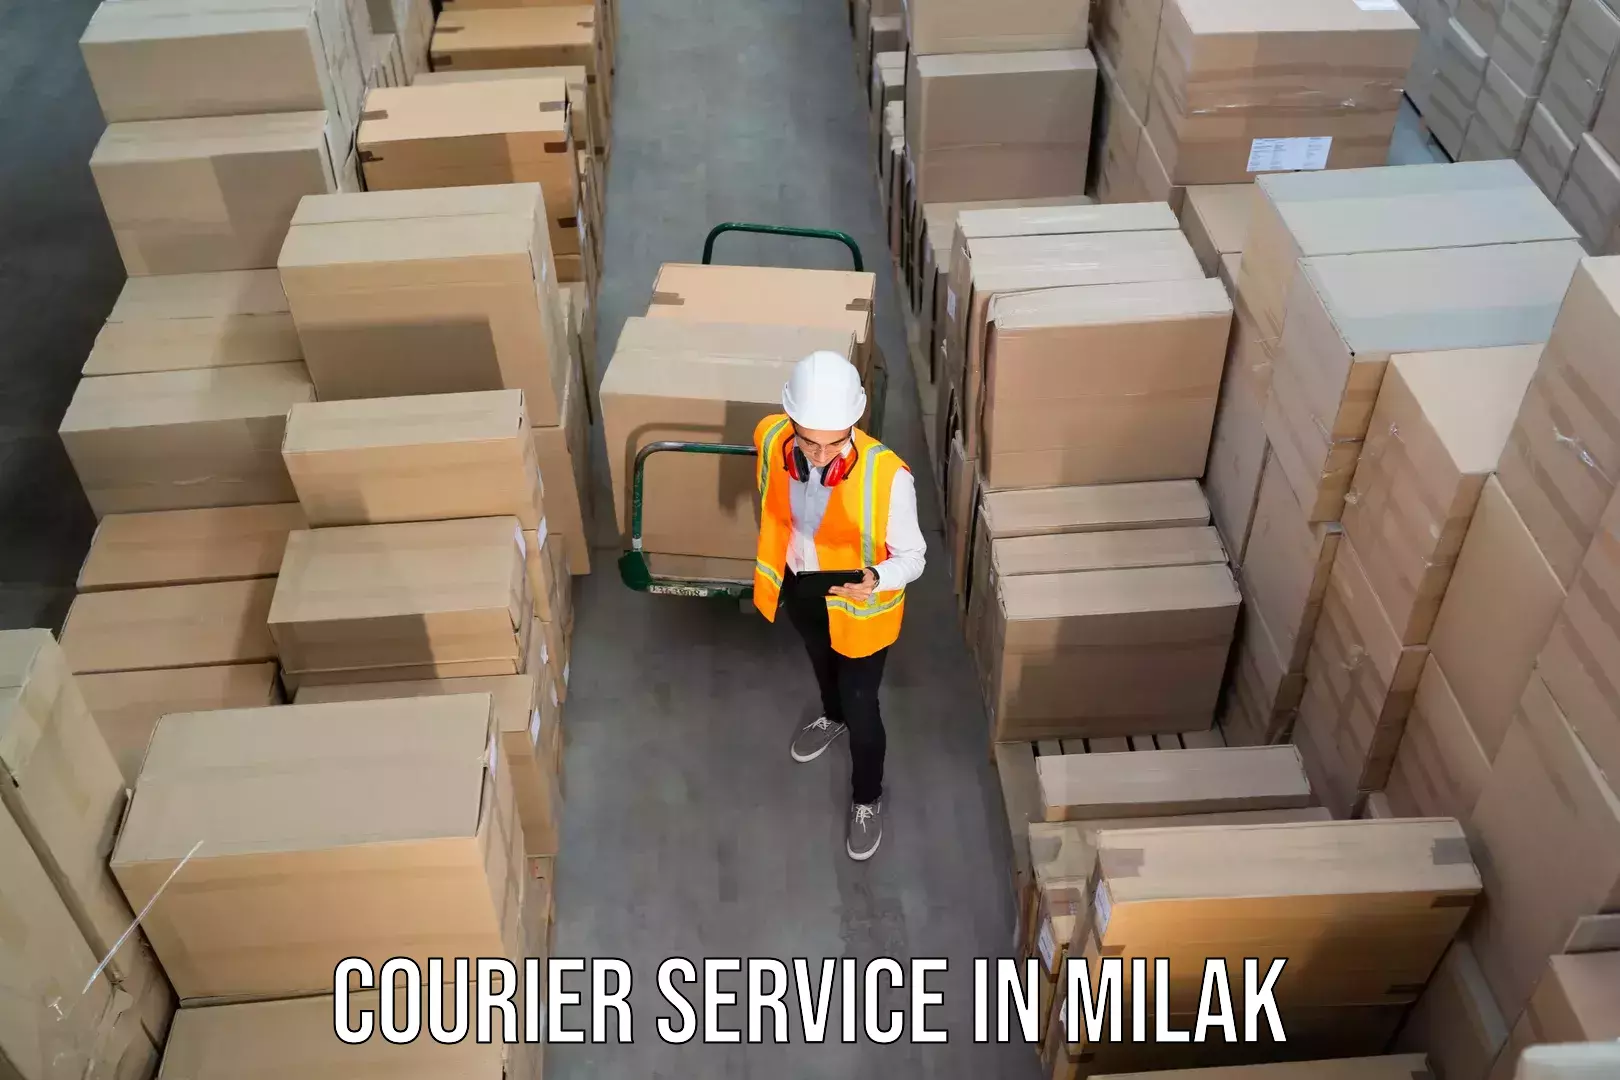 E-commerce shipping in Milak